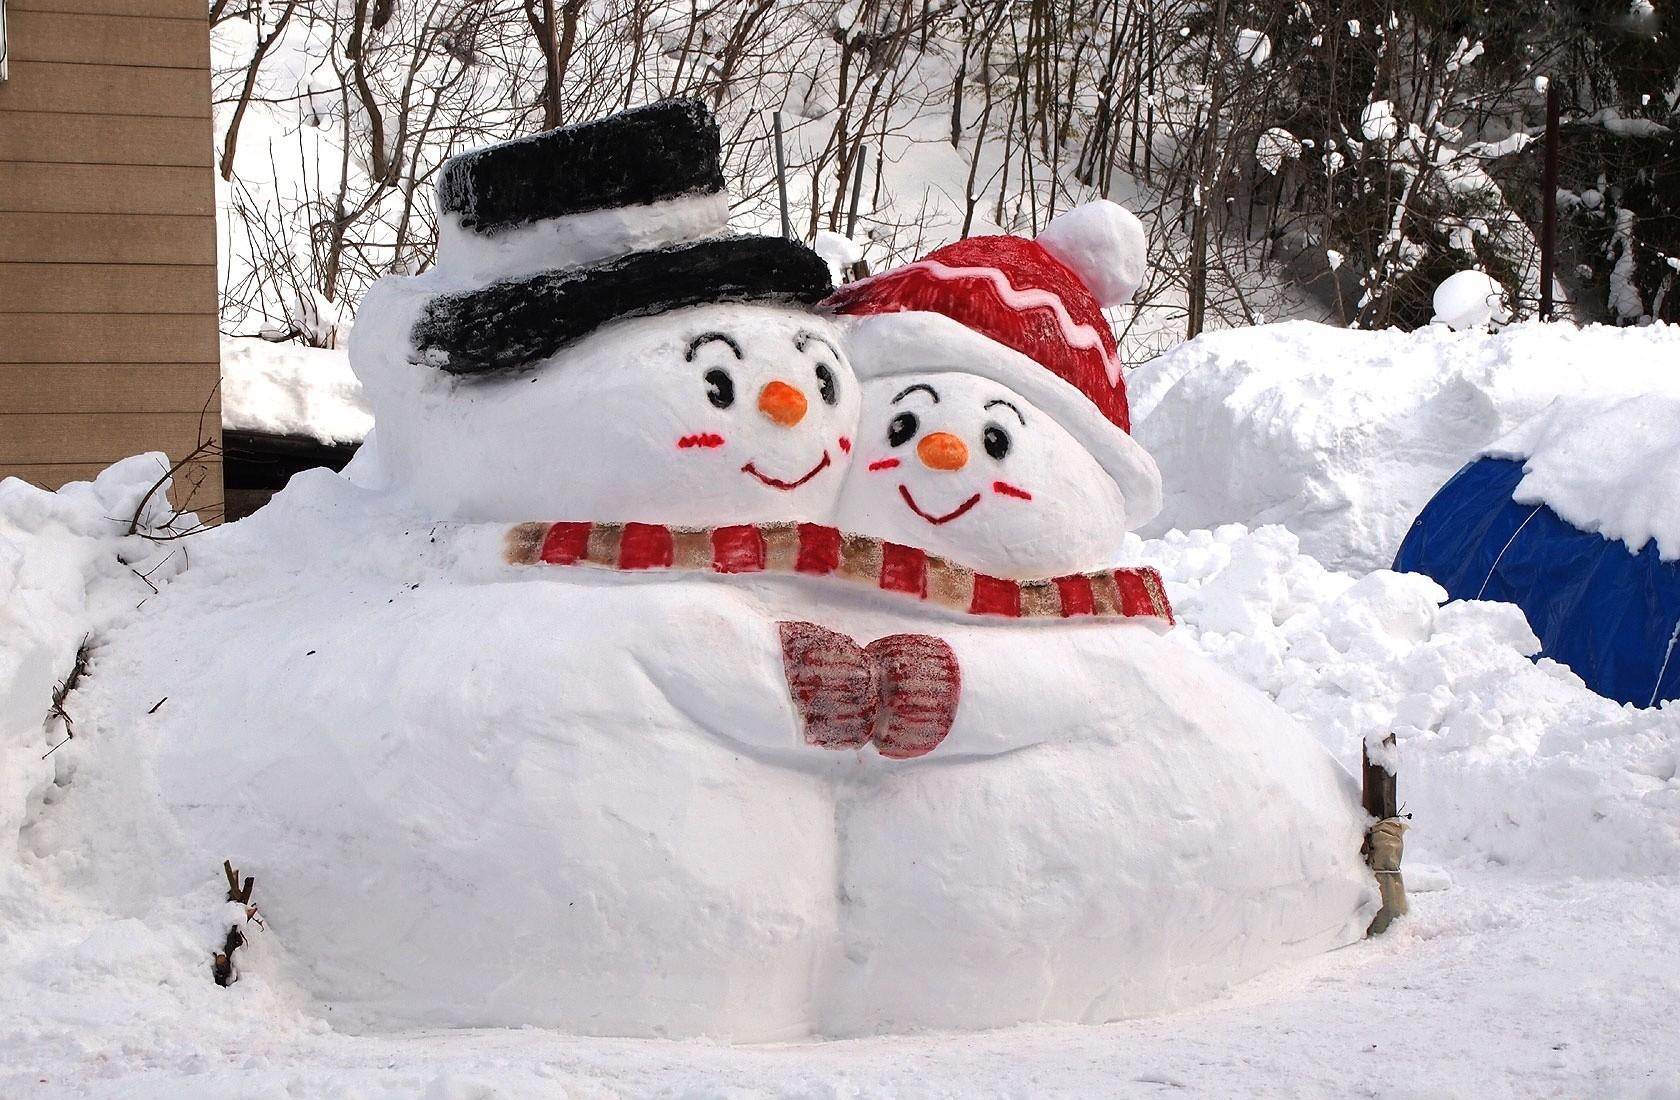 Free Images snow, holidays, embrace, winter Snowman